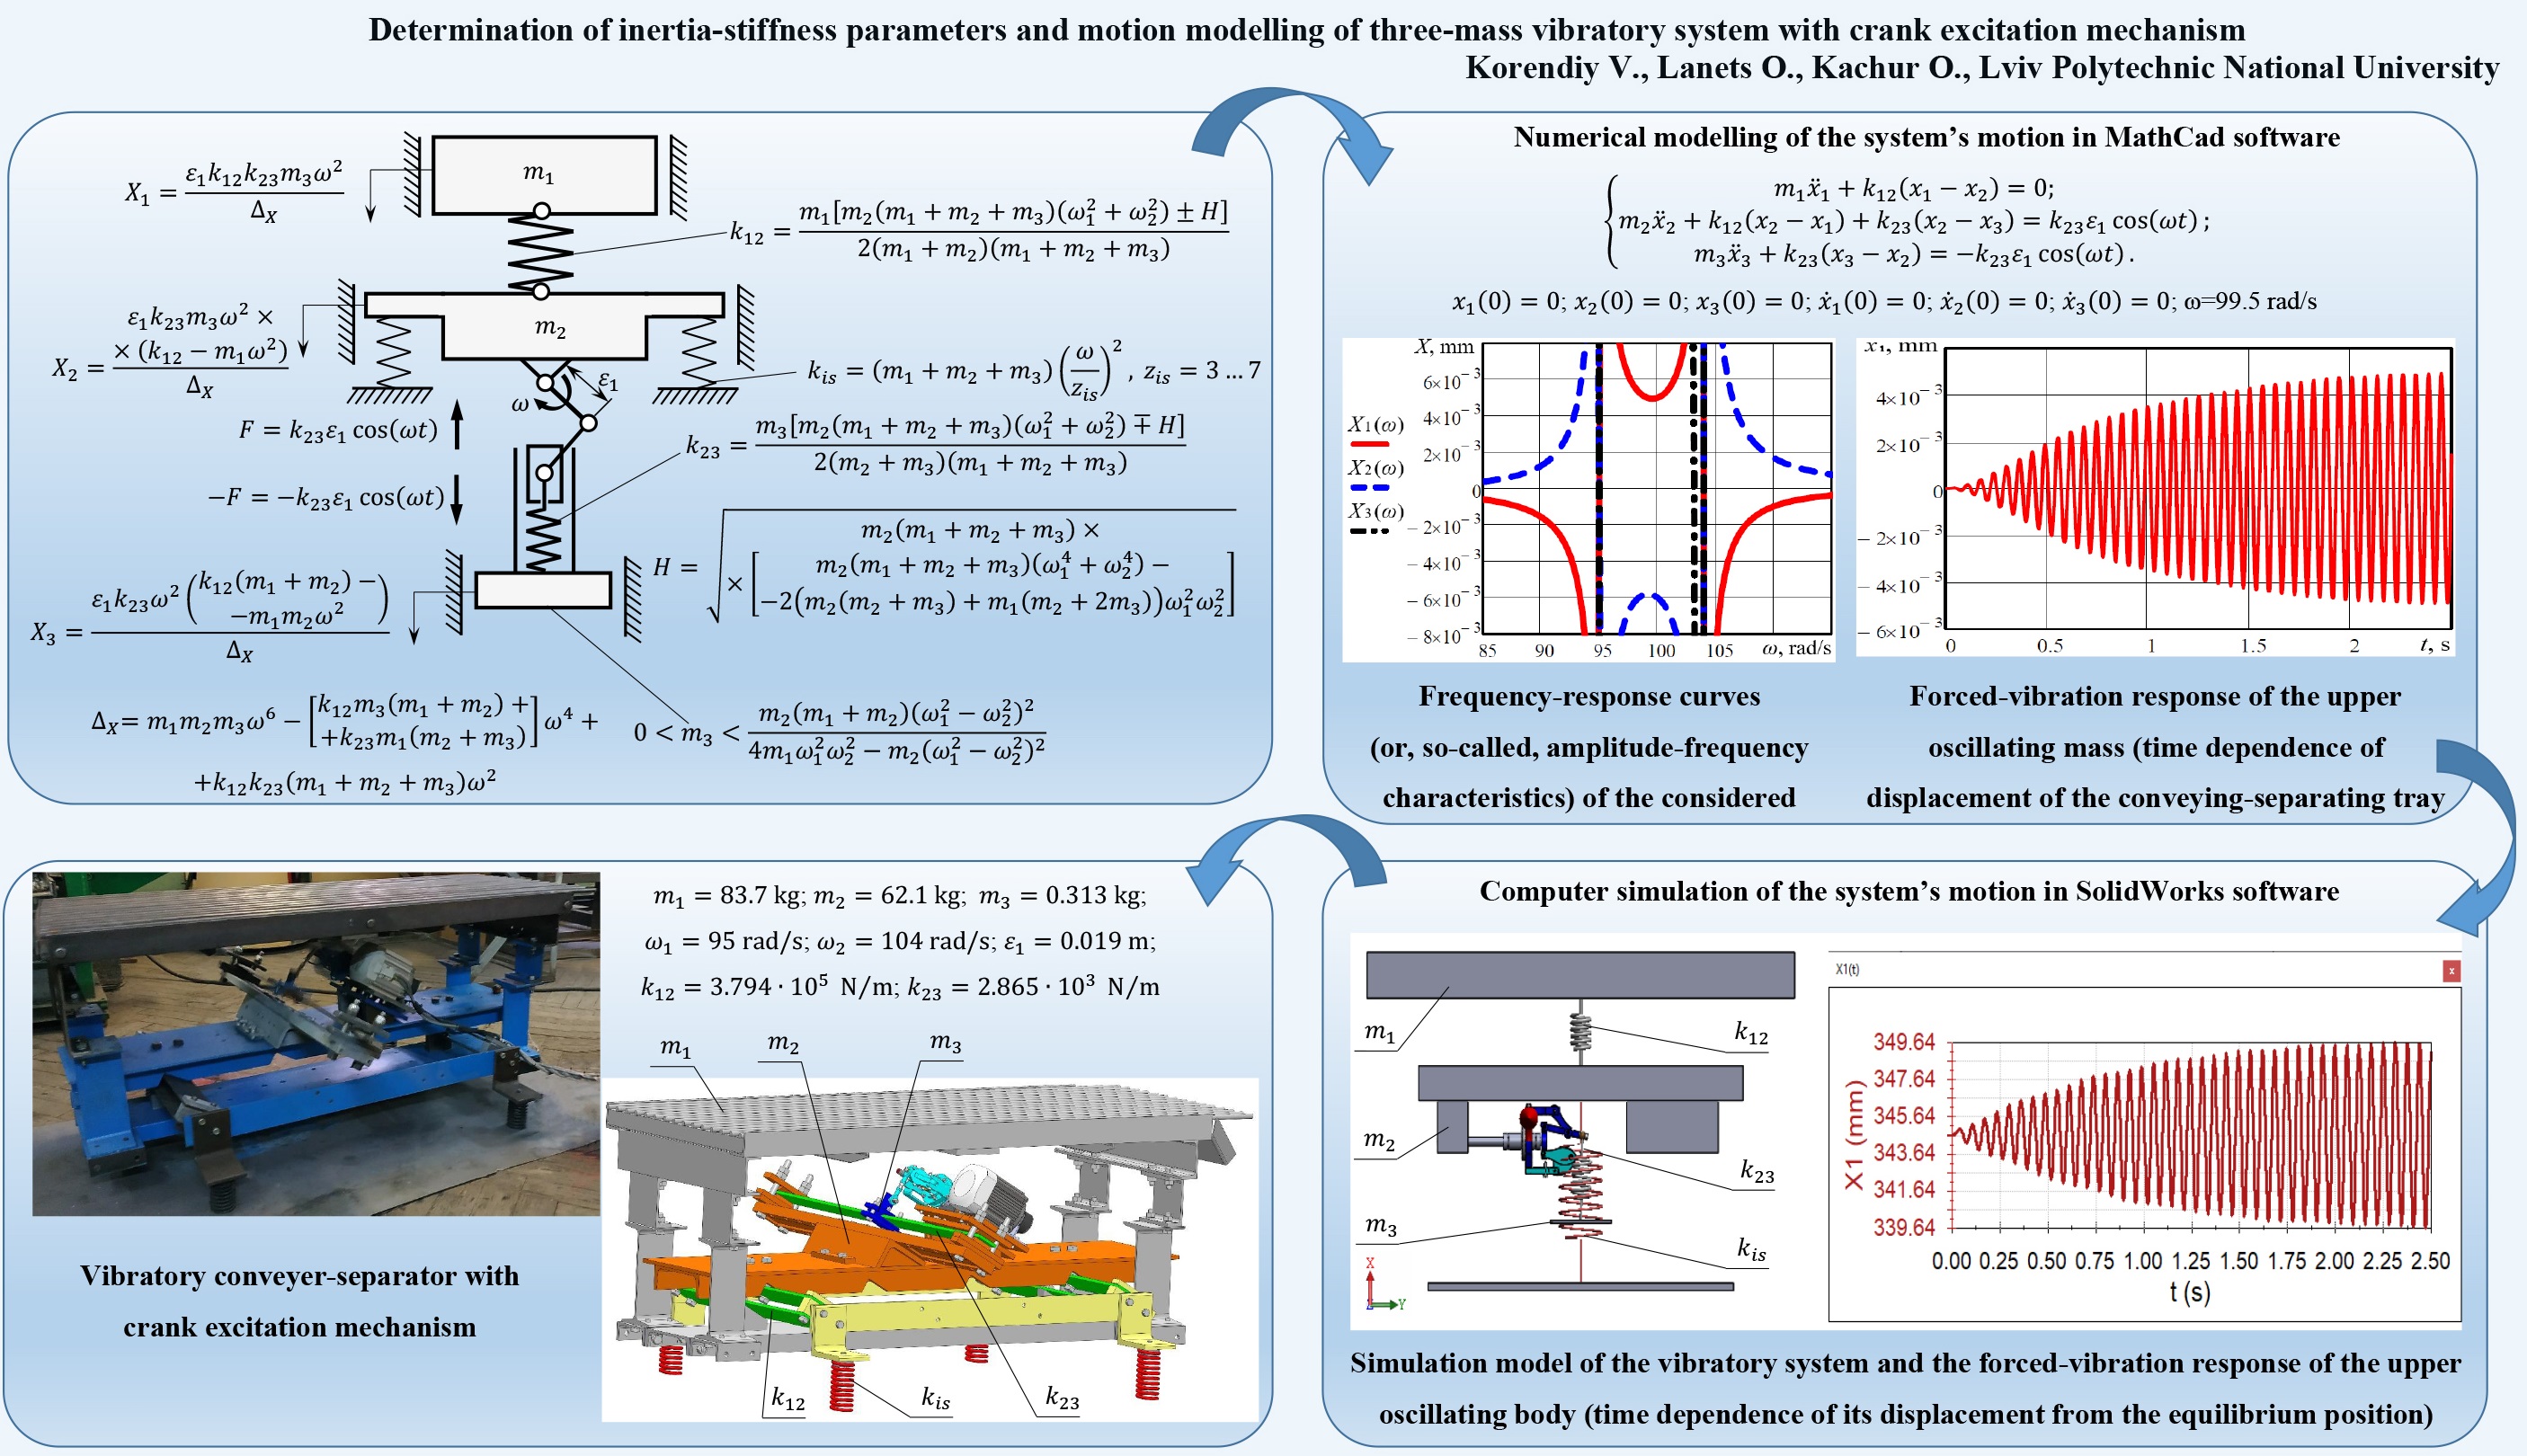 Determination of inertia-stiffness parameters and motion modelling of three-mass vibratory system with crank excitation mechanism